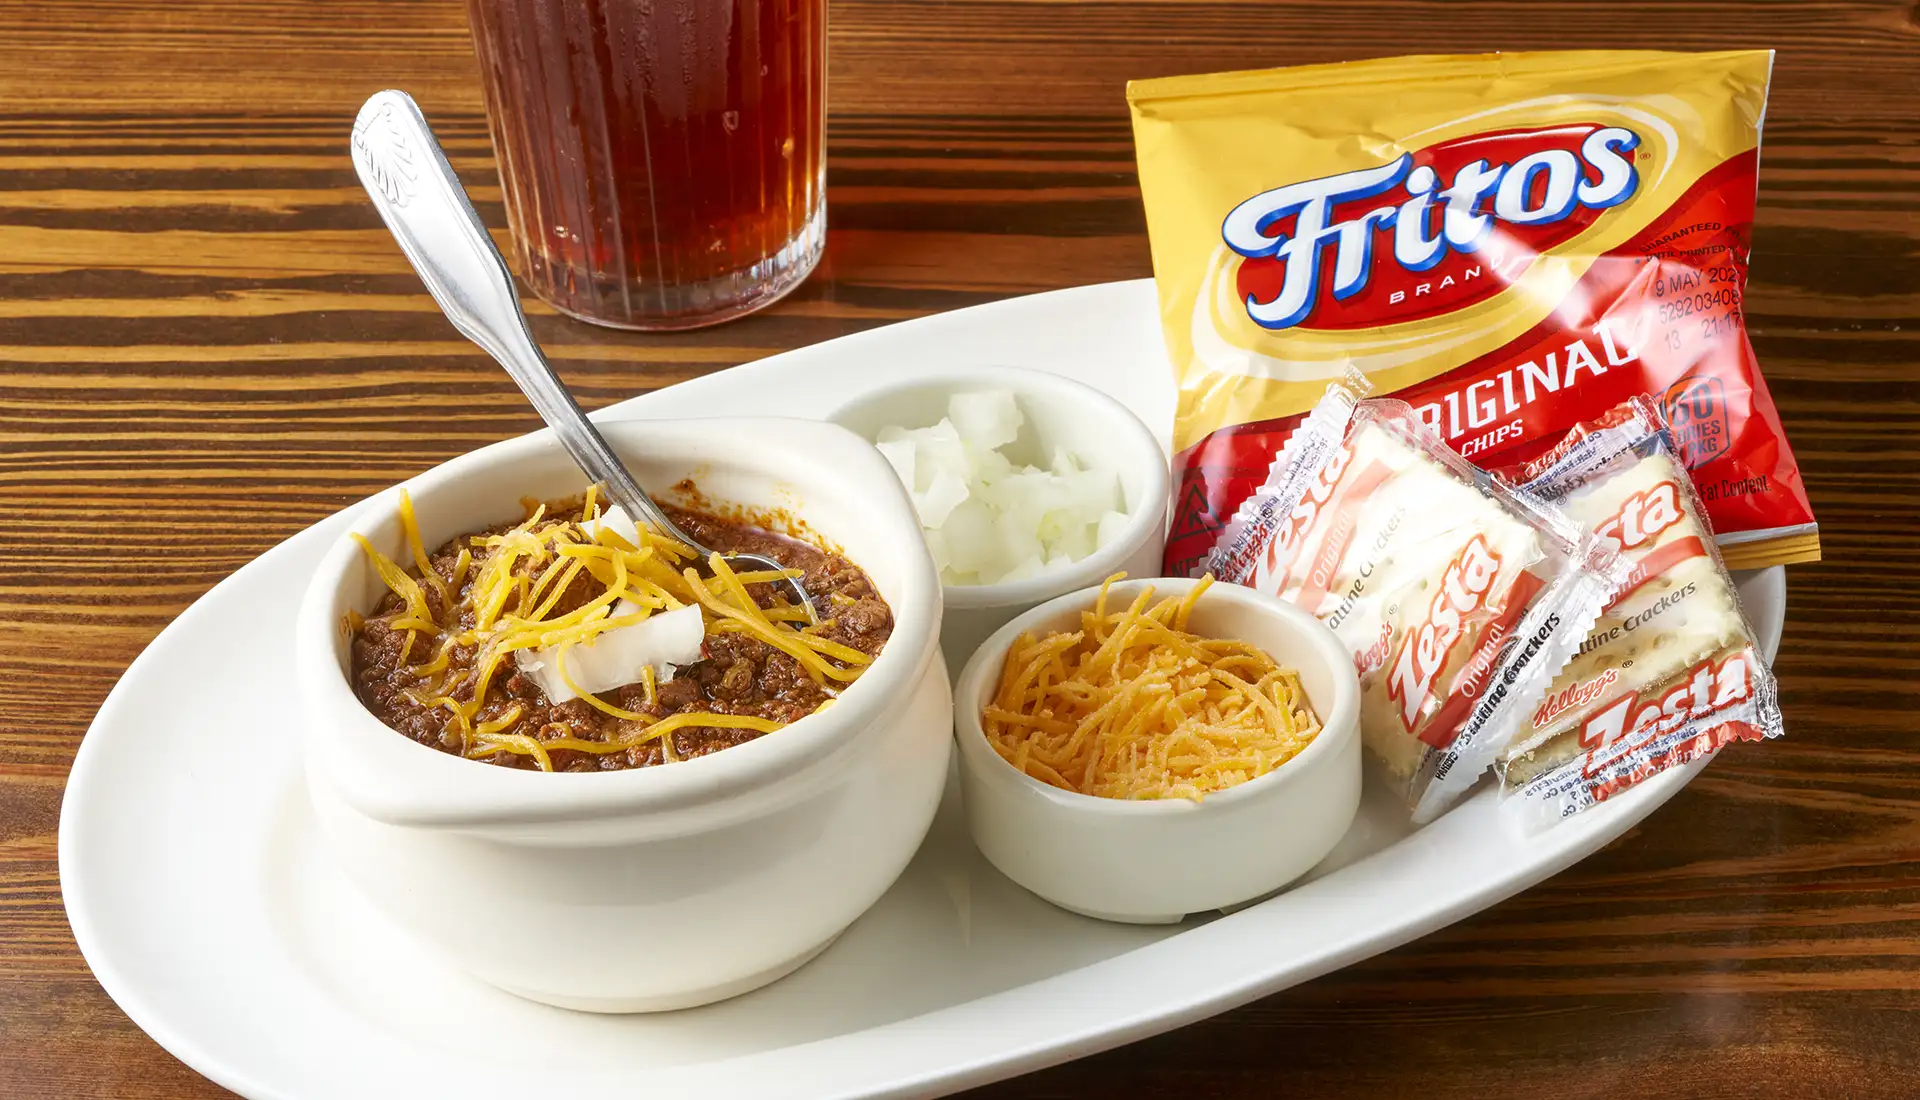 This Texas tradition, made from Goodstock by Nolan Ryan ® Ribeye steak makes this well seasoned homemade chili special. Served with shredded Cheddar cheese, fresh chopped onions, Fritos and crackers.